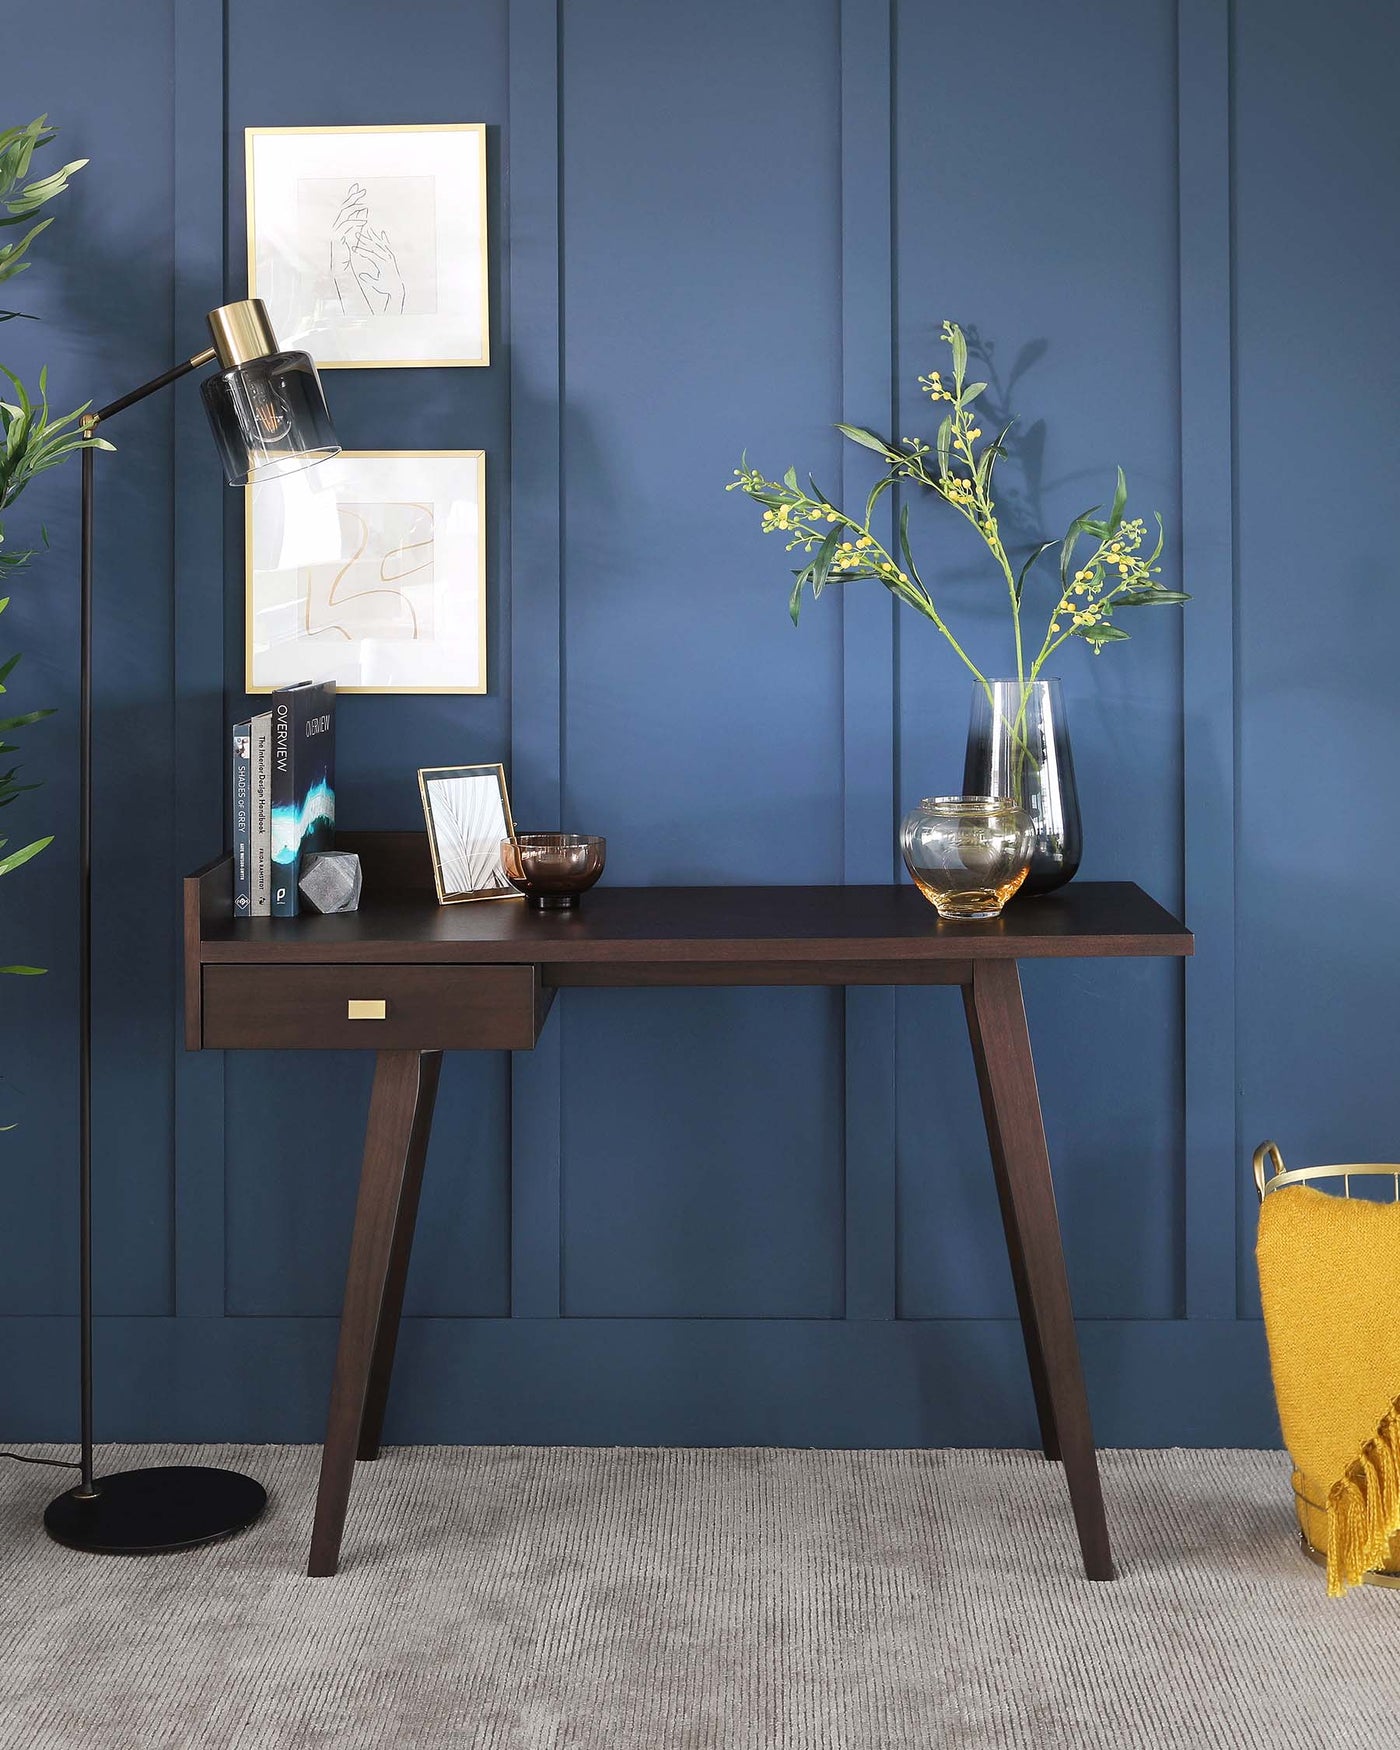 A contemporary wooden console table with a dark brown finish, slim rectangular tabletop, and tapered legs. The table hosts a single centred drawer with a brass pull knob, displaying clean lines and minimalistic design. It’s complemented by a decorative vase with greenery, books, and decorative objects, enhancing a sophisticated and modern aesthetic.